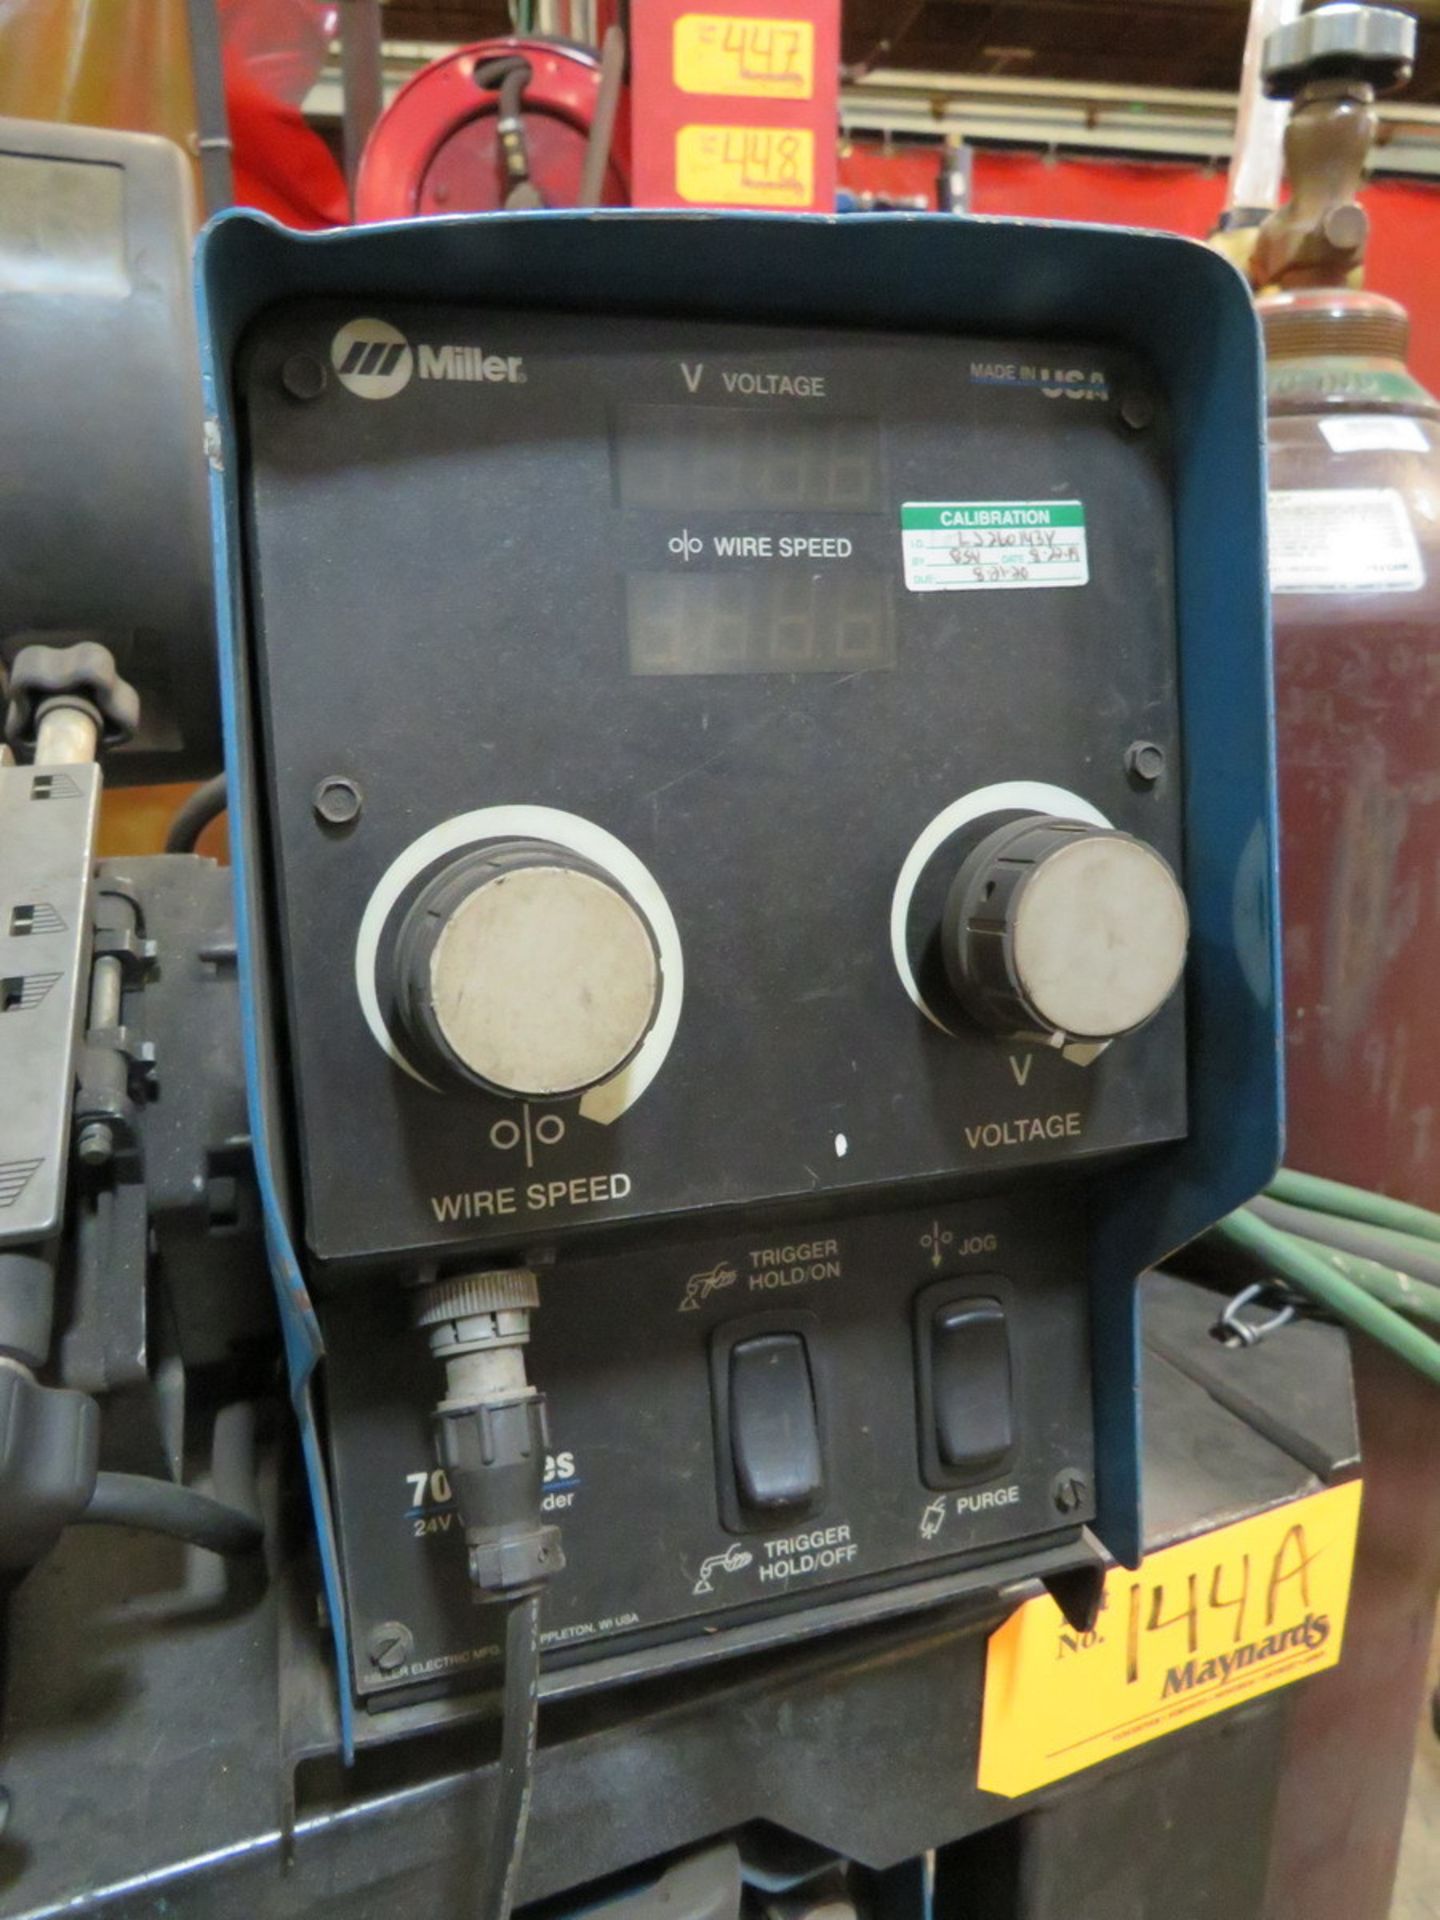 2010 Miller Invision 352MPa Welding Power Source - Image 4 of 6